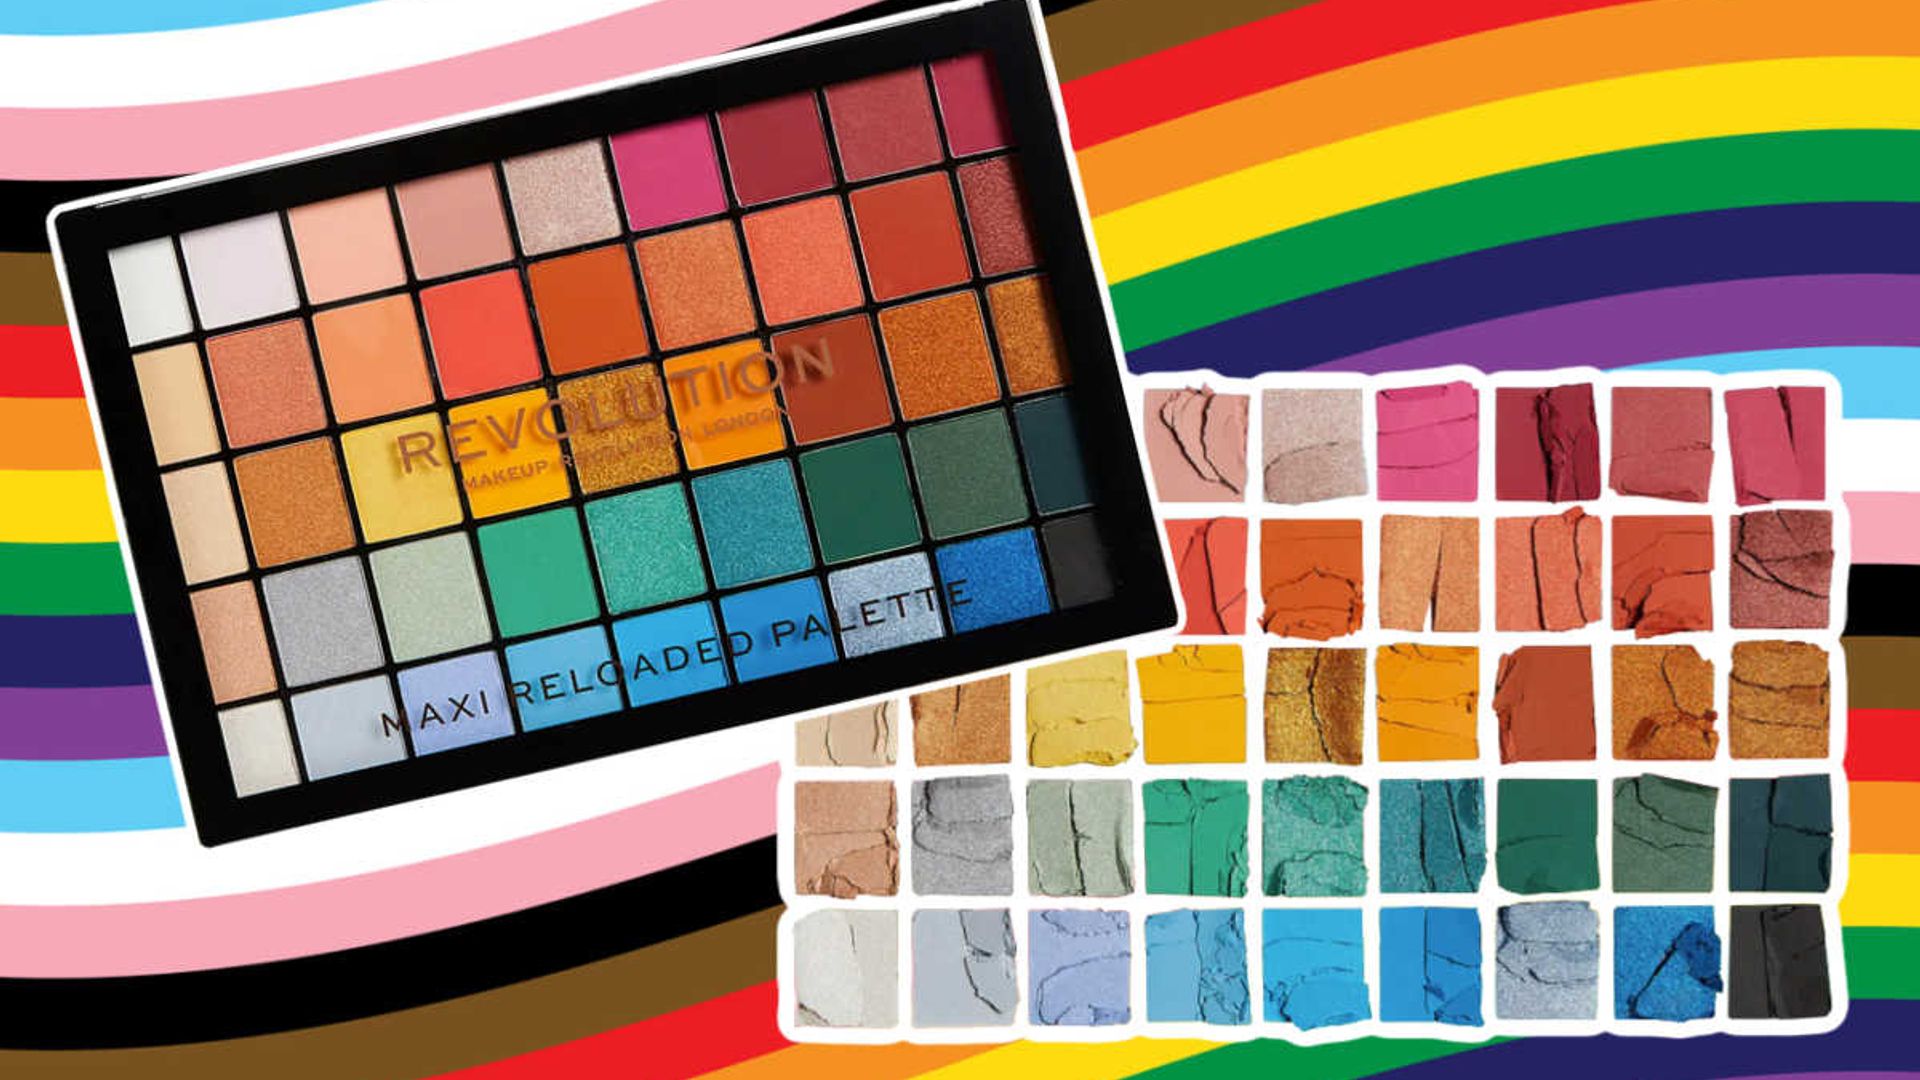 Need a glam beauty look for Pride? This $18 rainbow palette is all you need, we promise